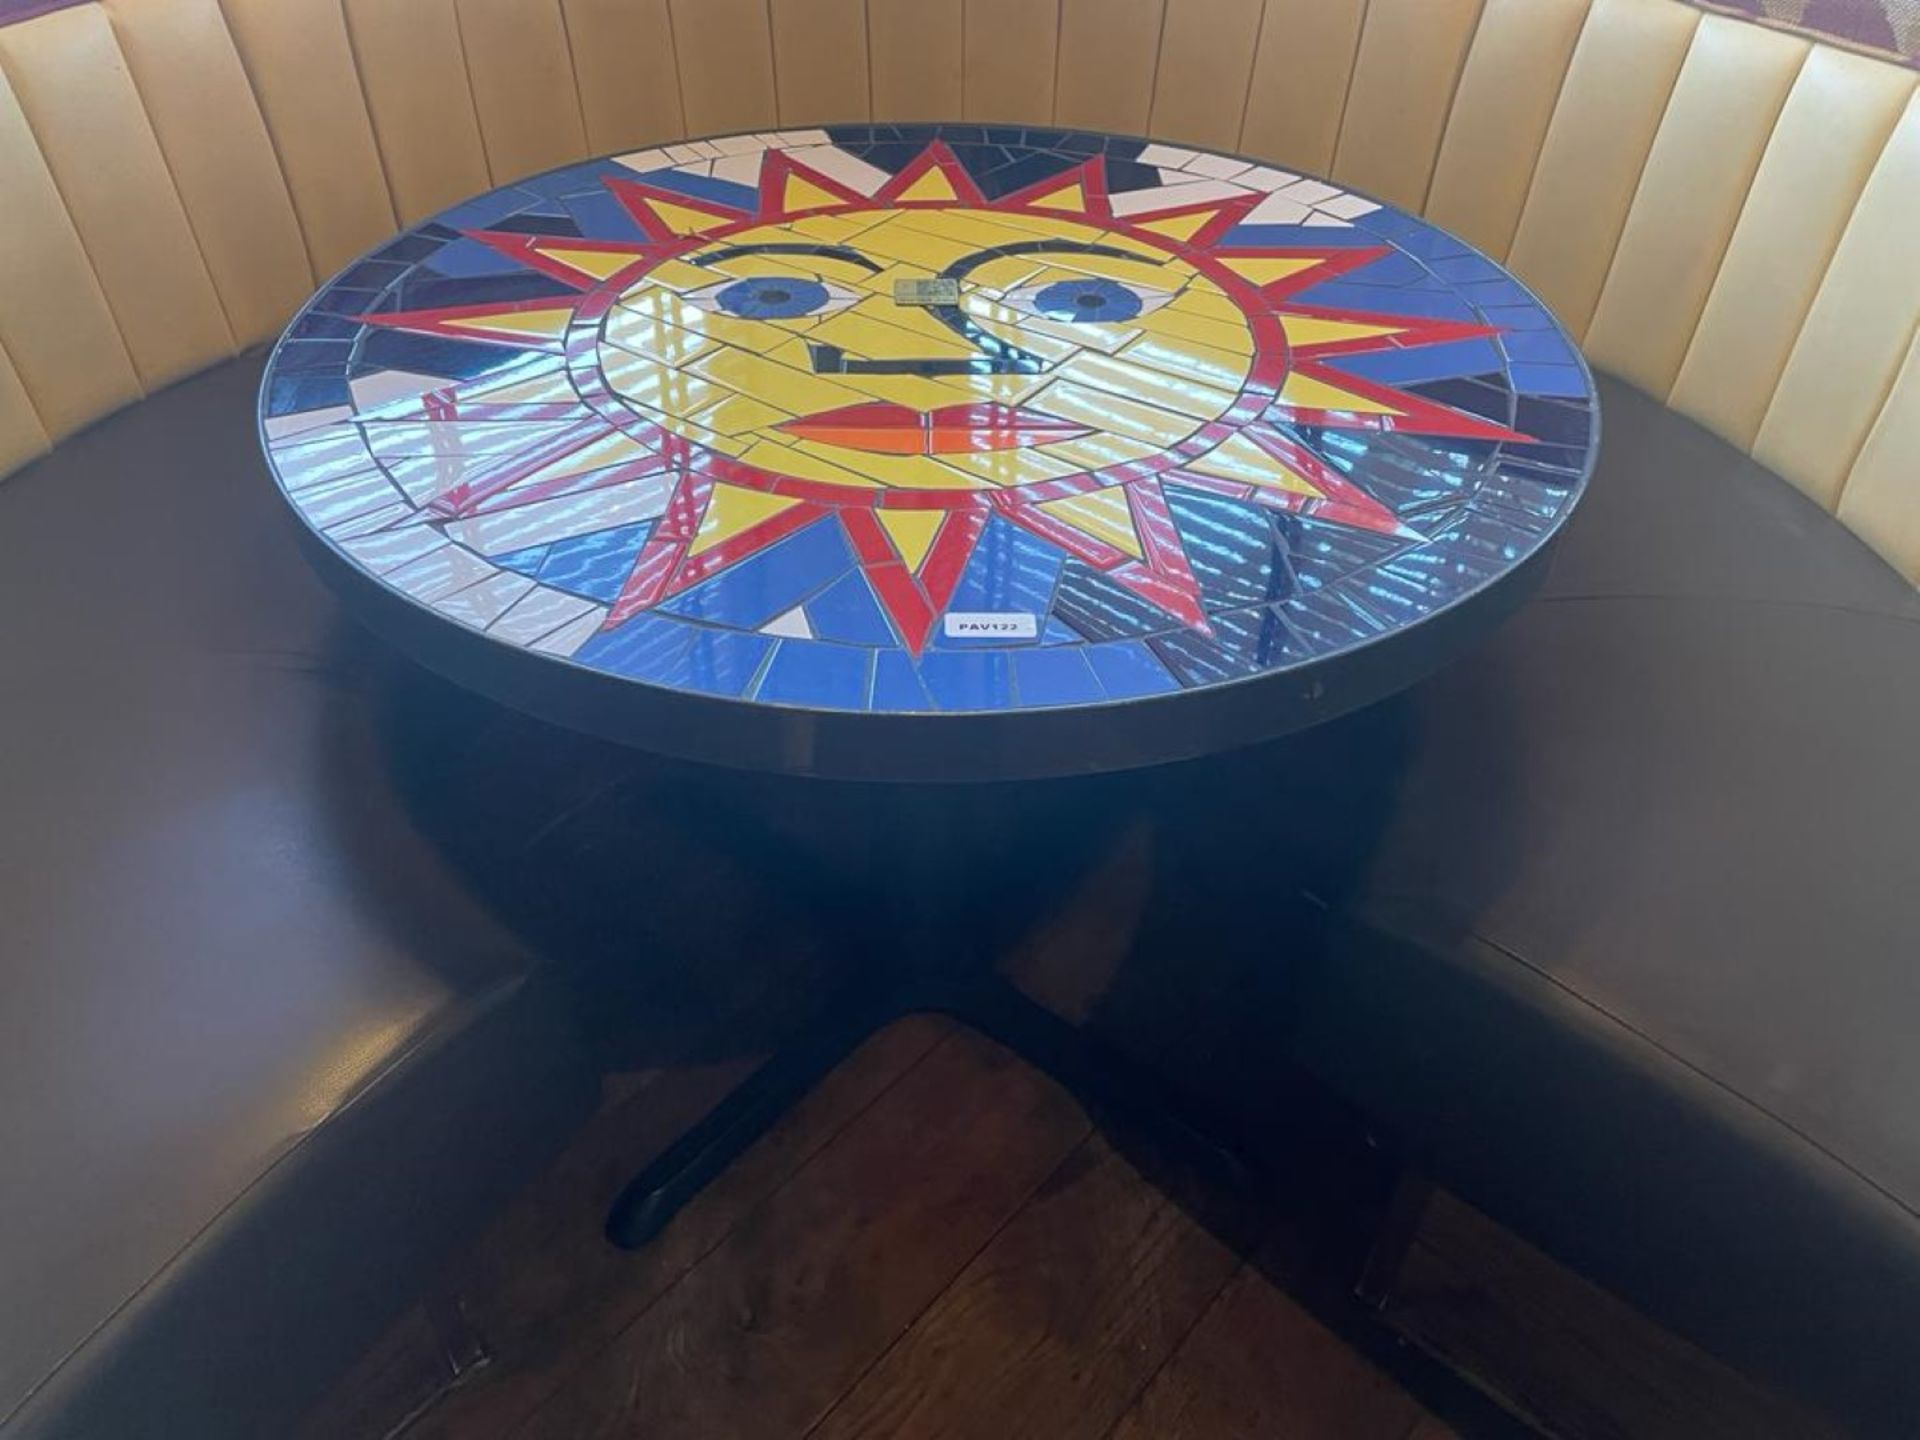 1 x Bespoke Psychedelic Sun Mosaic Dining Table With Cast Iron Base - Ref: PAV122 - Height 74 x - Image 4 of 4